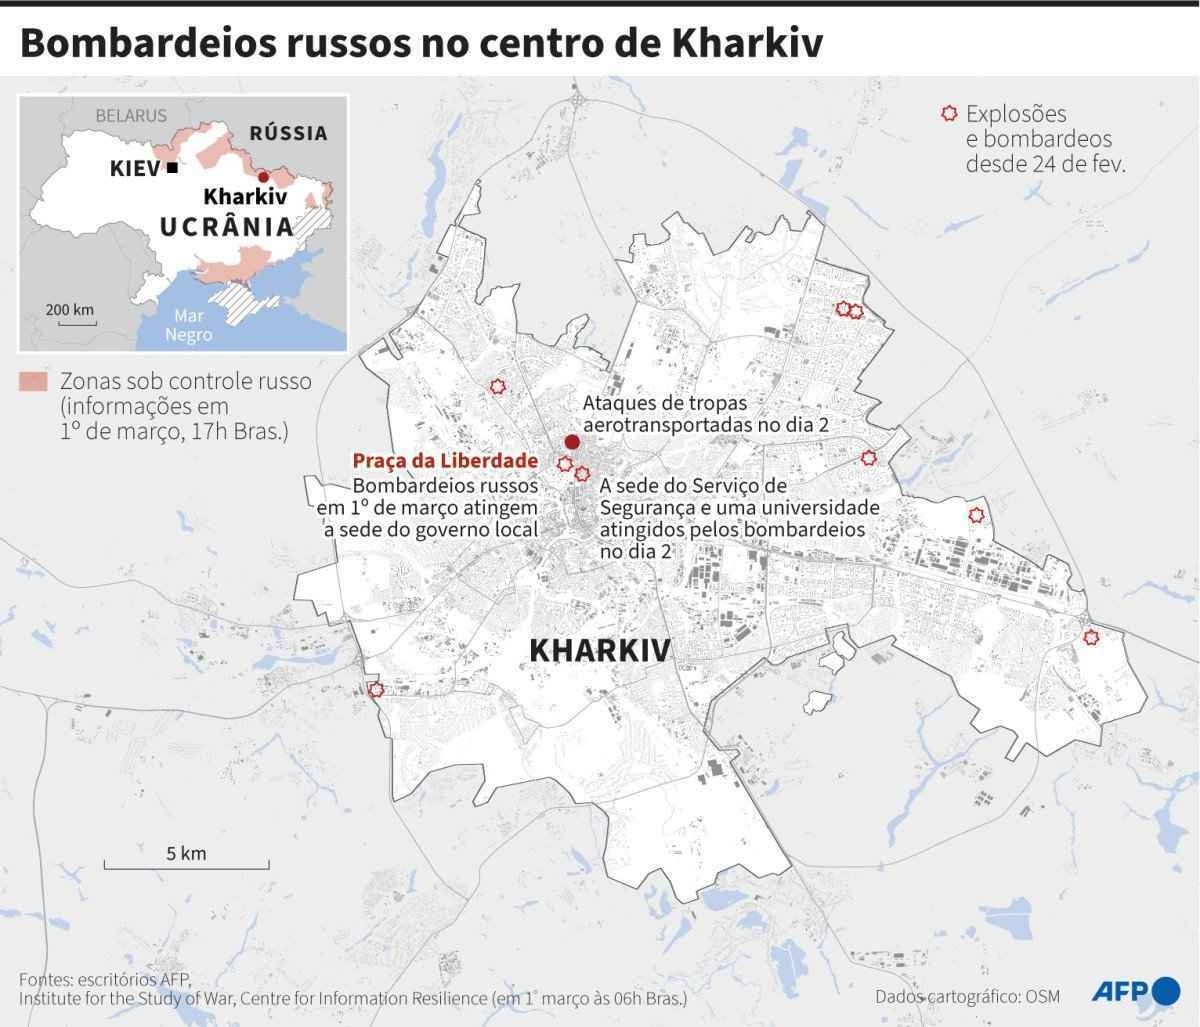 Infographics Wednesday 2/3 - Location of explosions and bombings since February 24 in the center of Kharkiv, Ukraine's second largest city.  Credits: Simon Malfato, Sophie Ramis, Maria-Cecilia Rezende, Kenan Augard / AFP